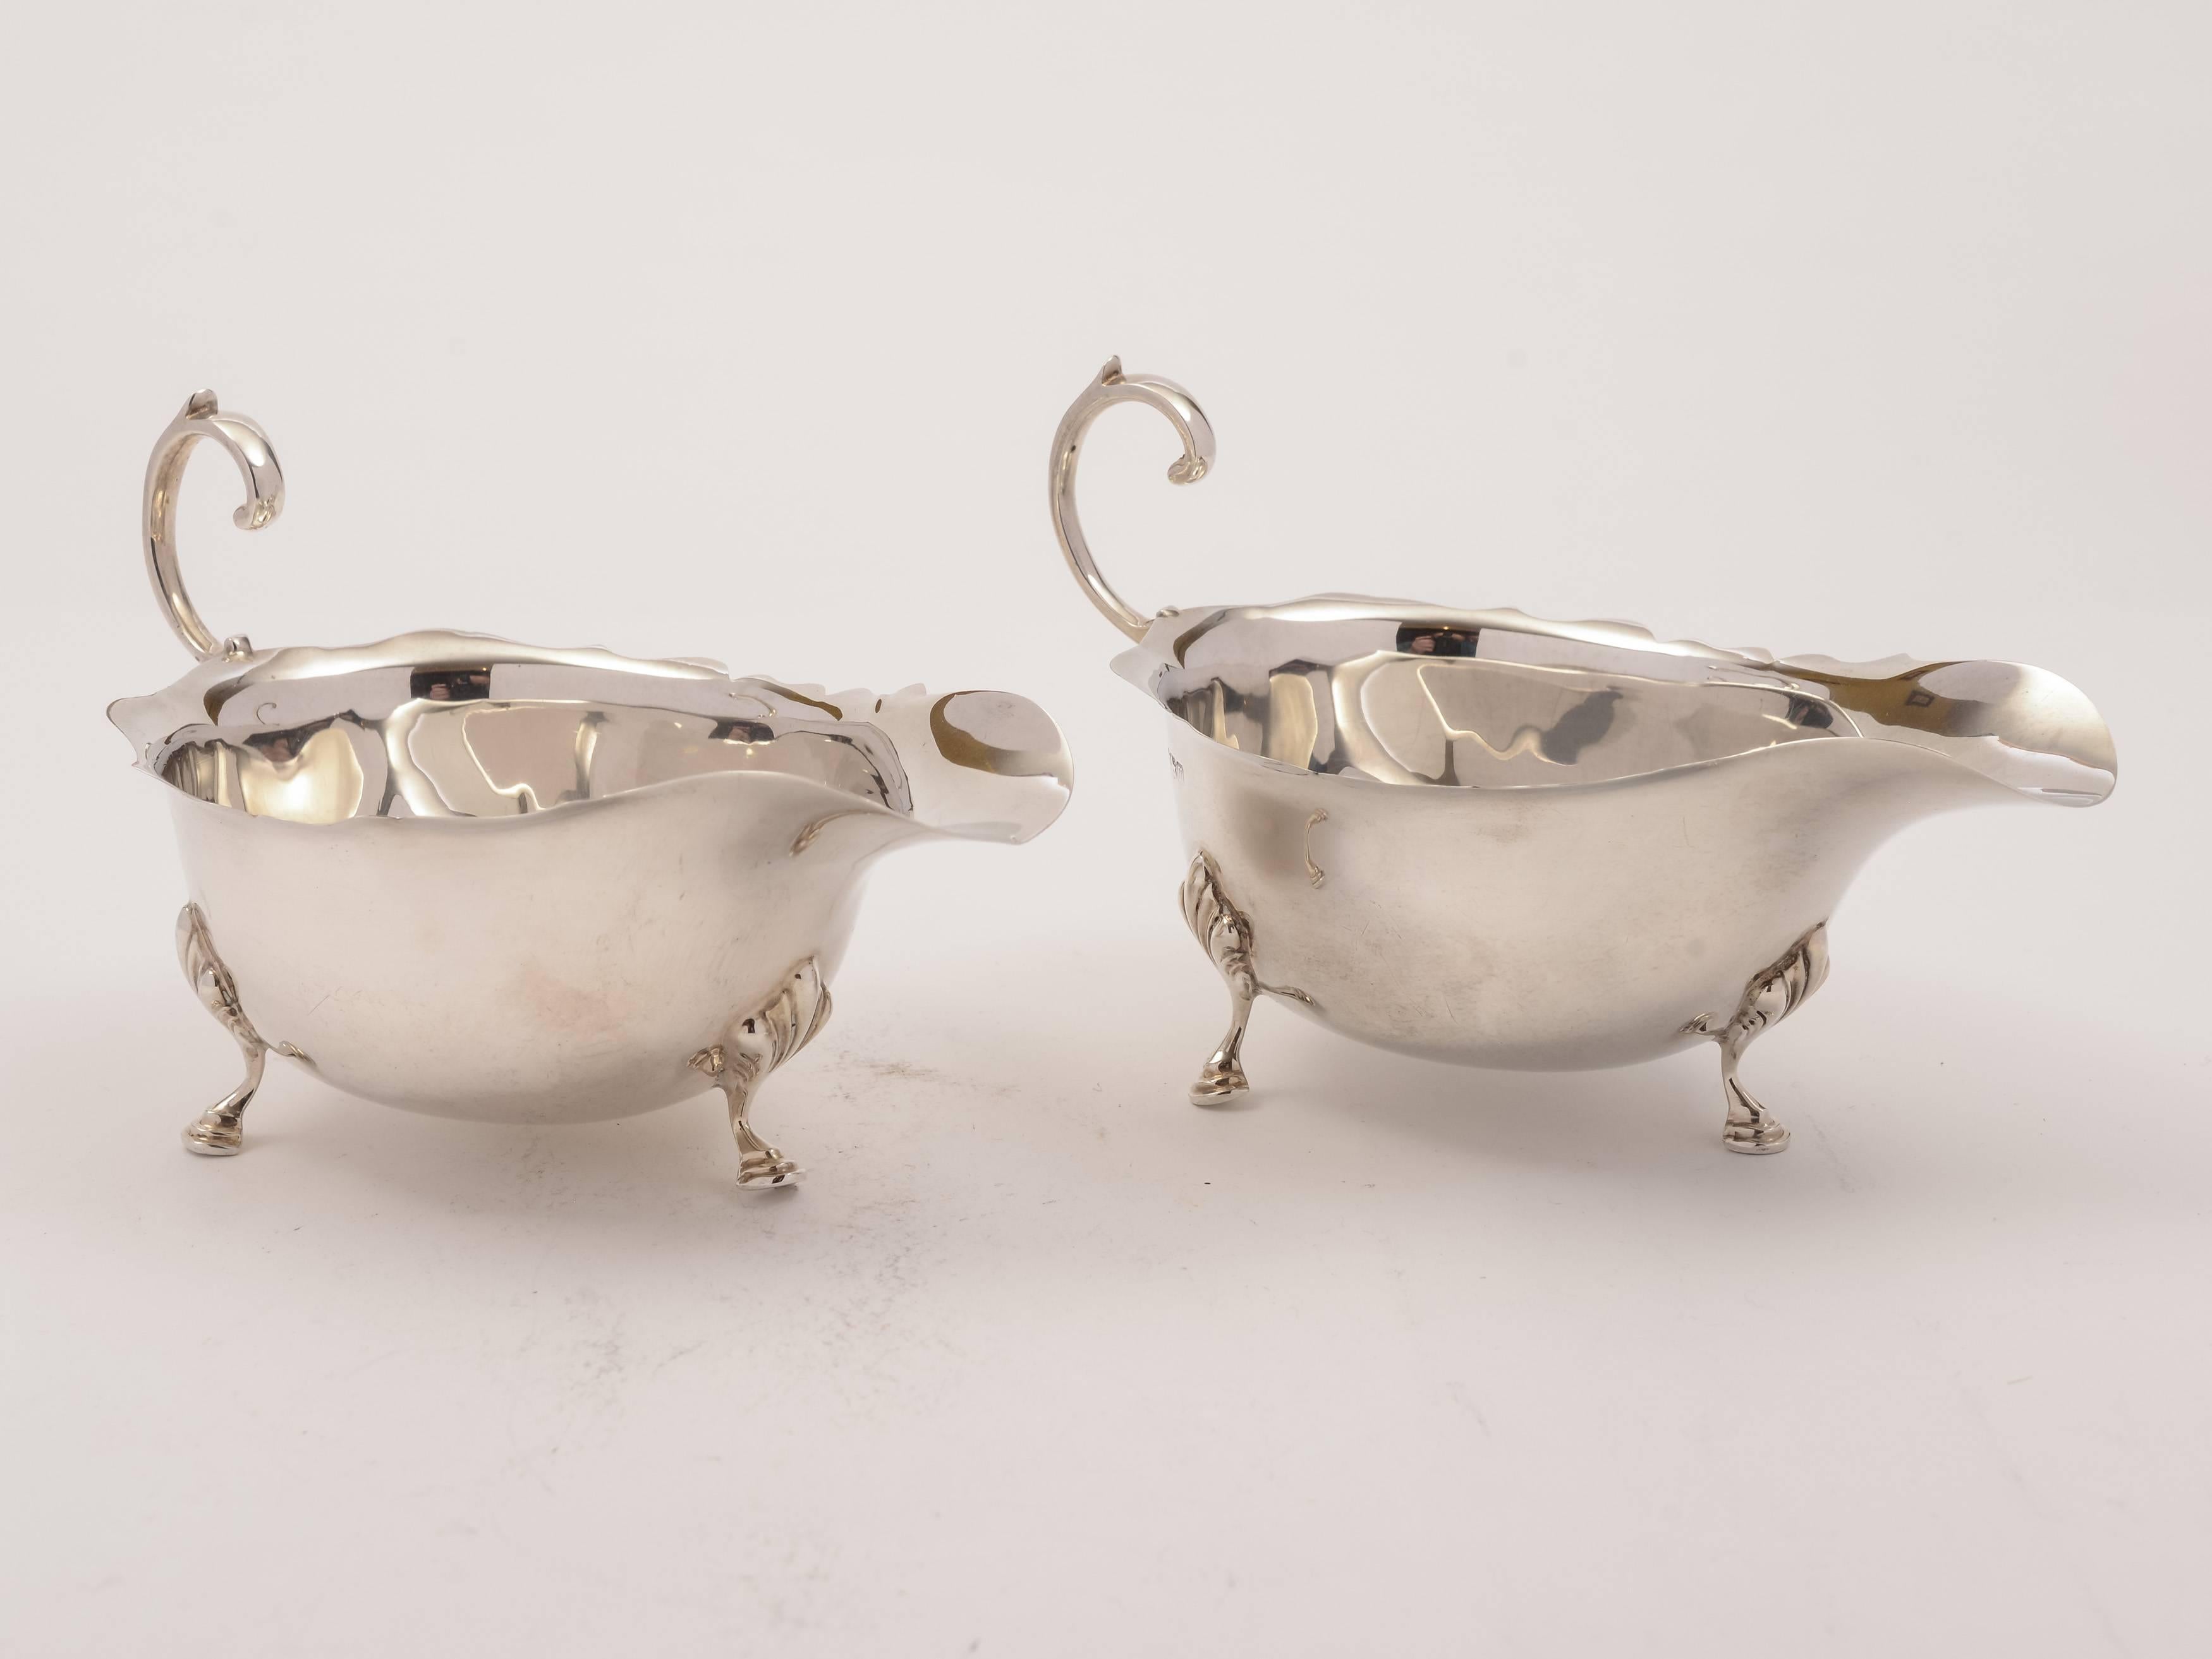 A lovely pair of English Art Deco period silver sauce boats which Stand on three feet, have card cut decoration to tops and scroll handles. Hallmarked Sheffield 1929 and marked 'B & S' for the maker Brook & Son. 

Measurements:
Height 3